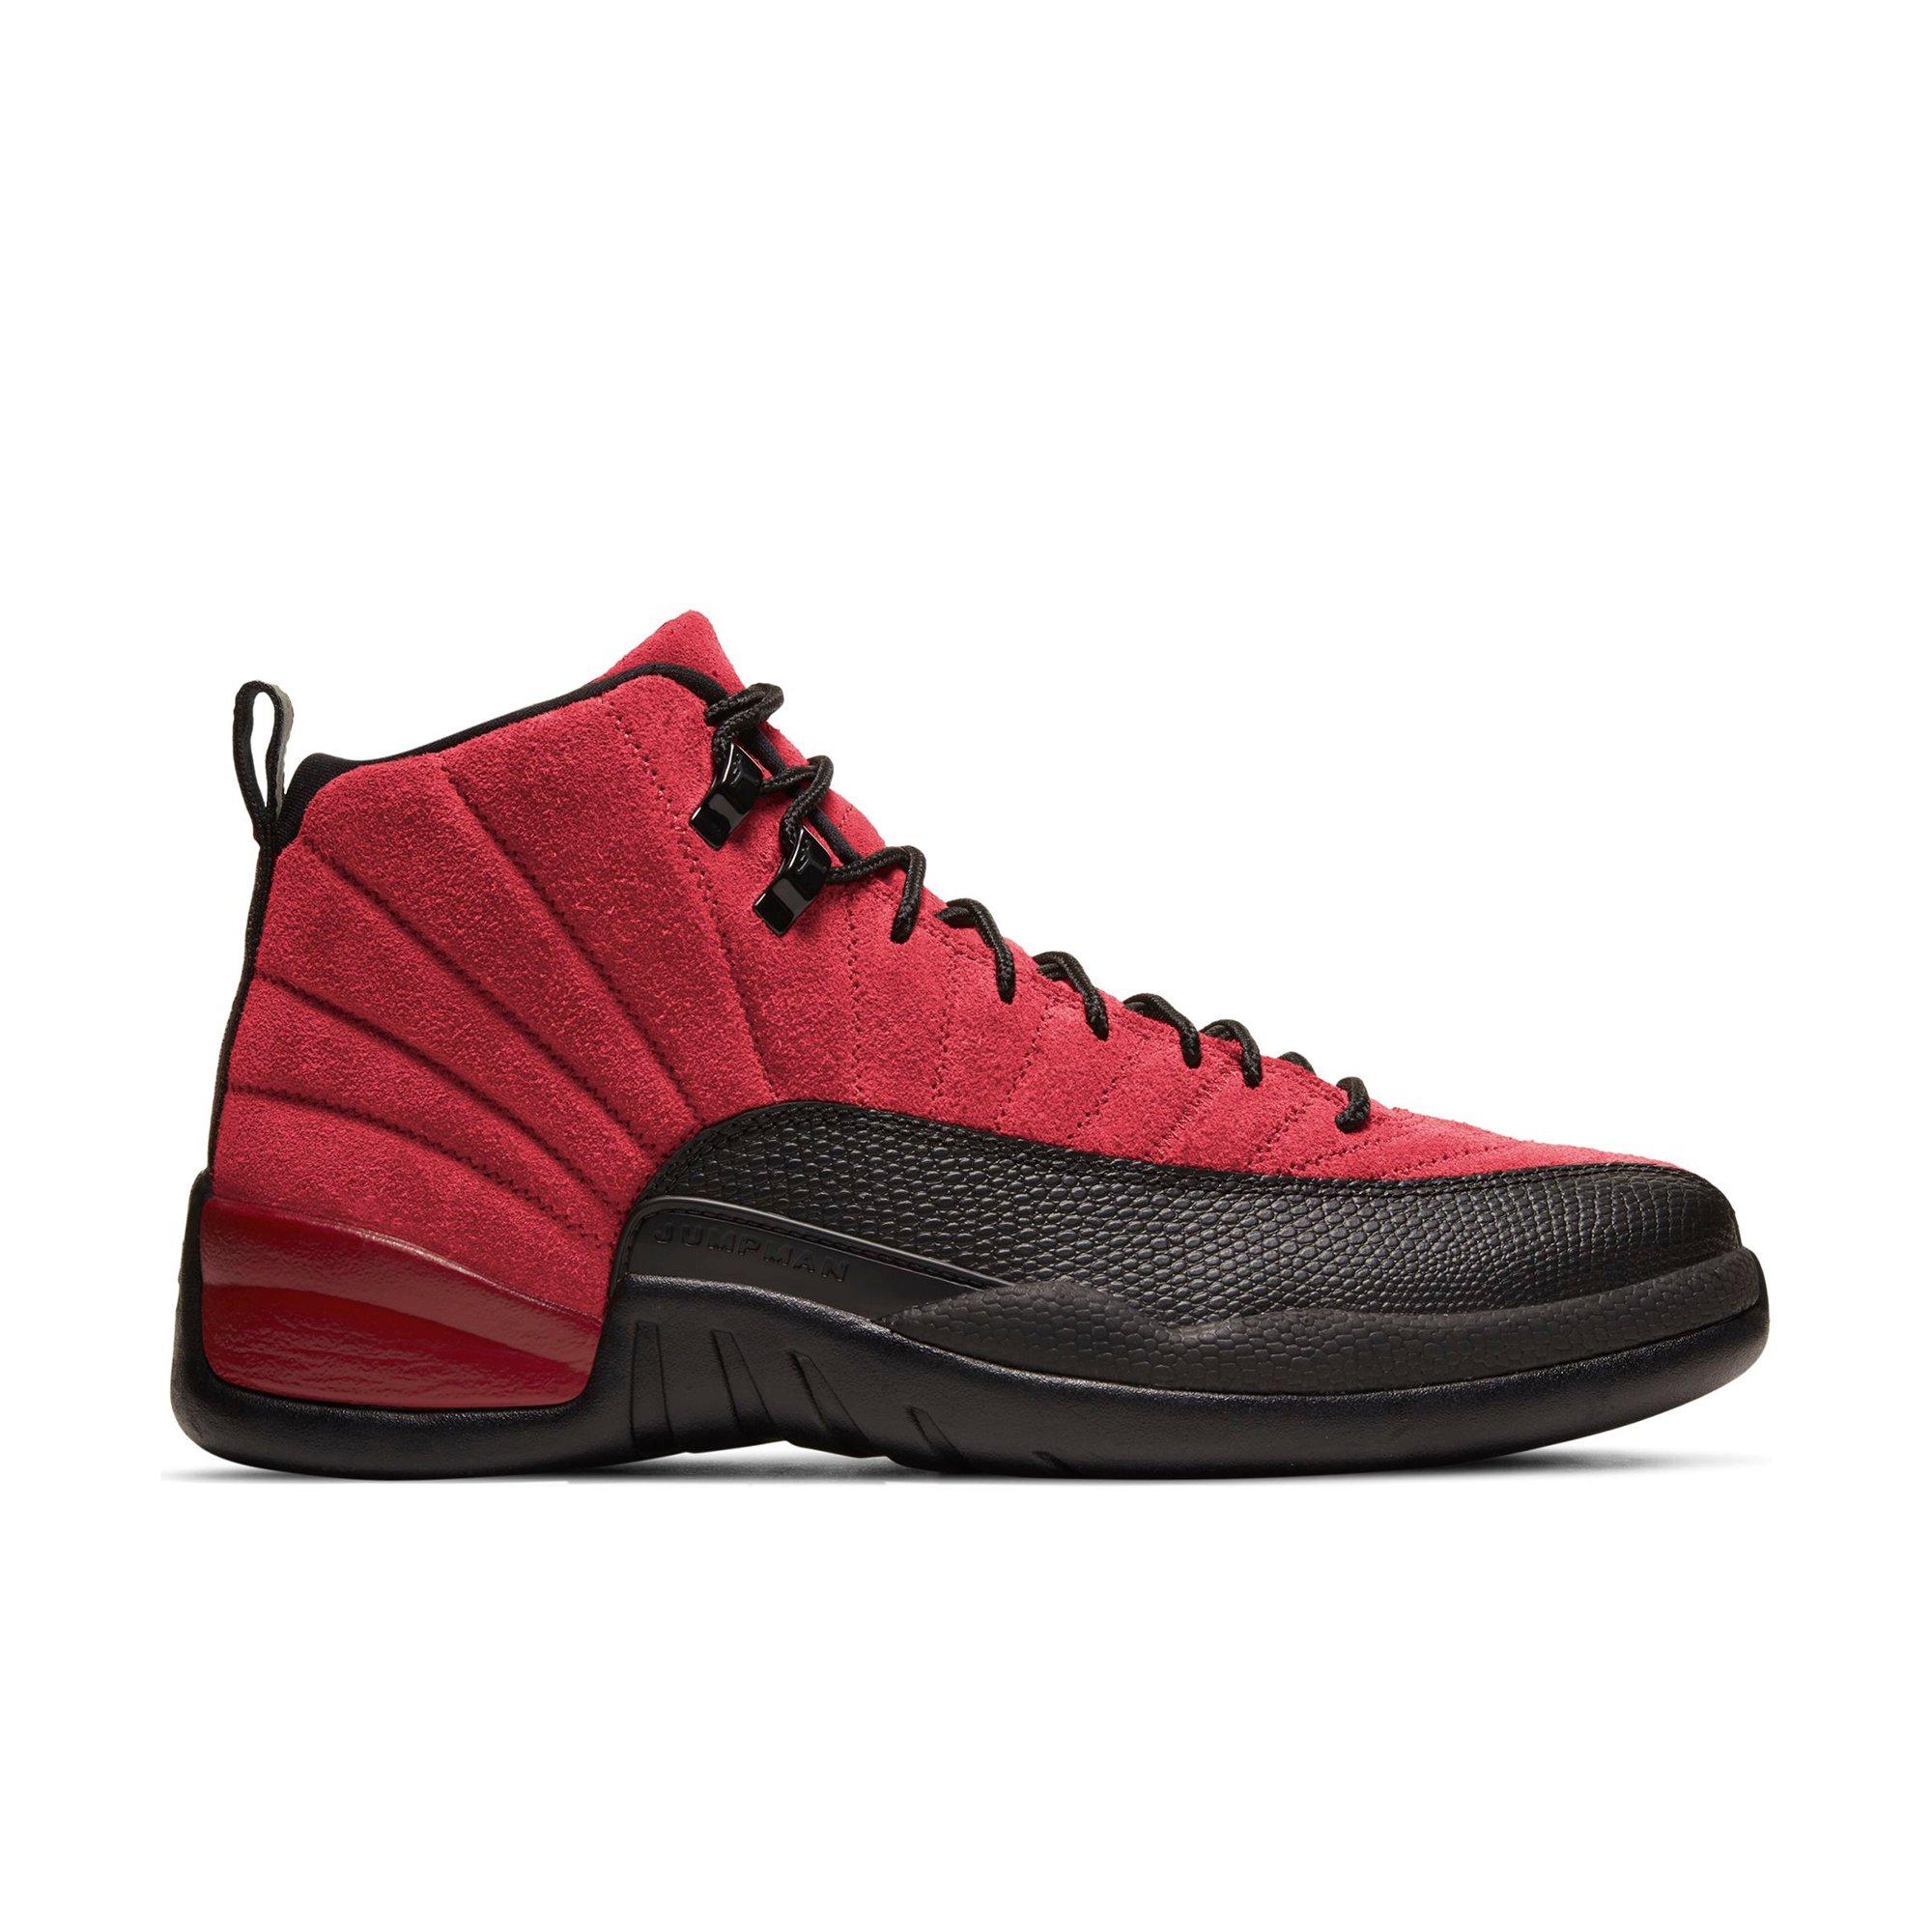 red and black 12s men